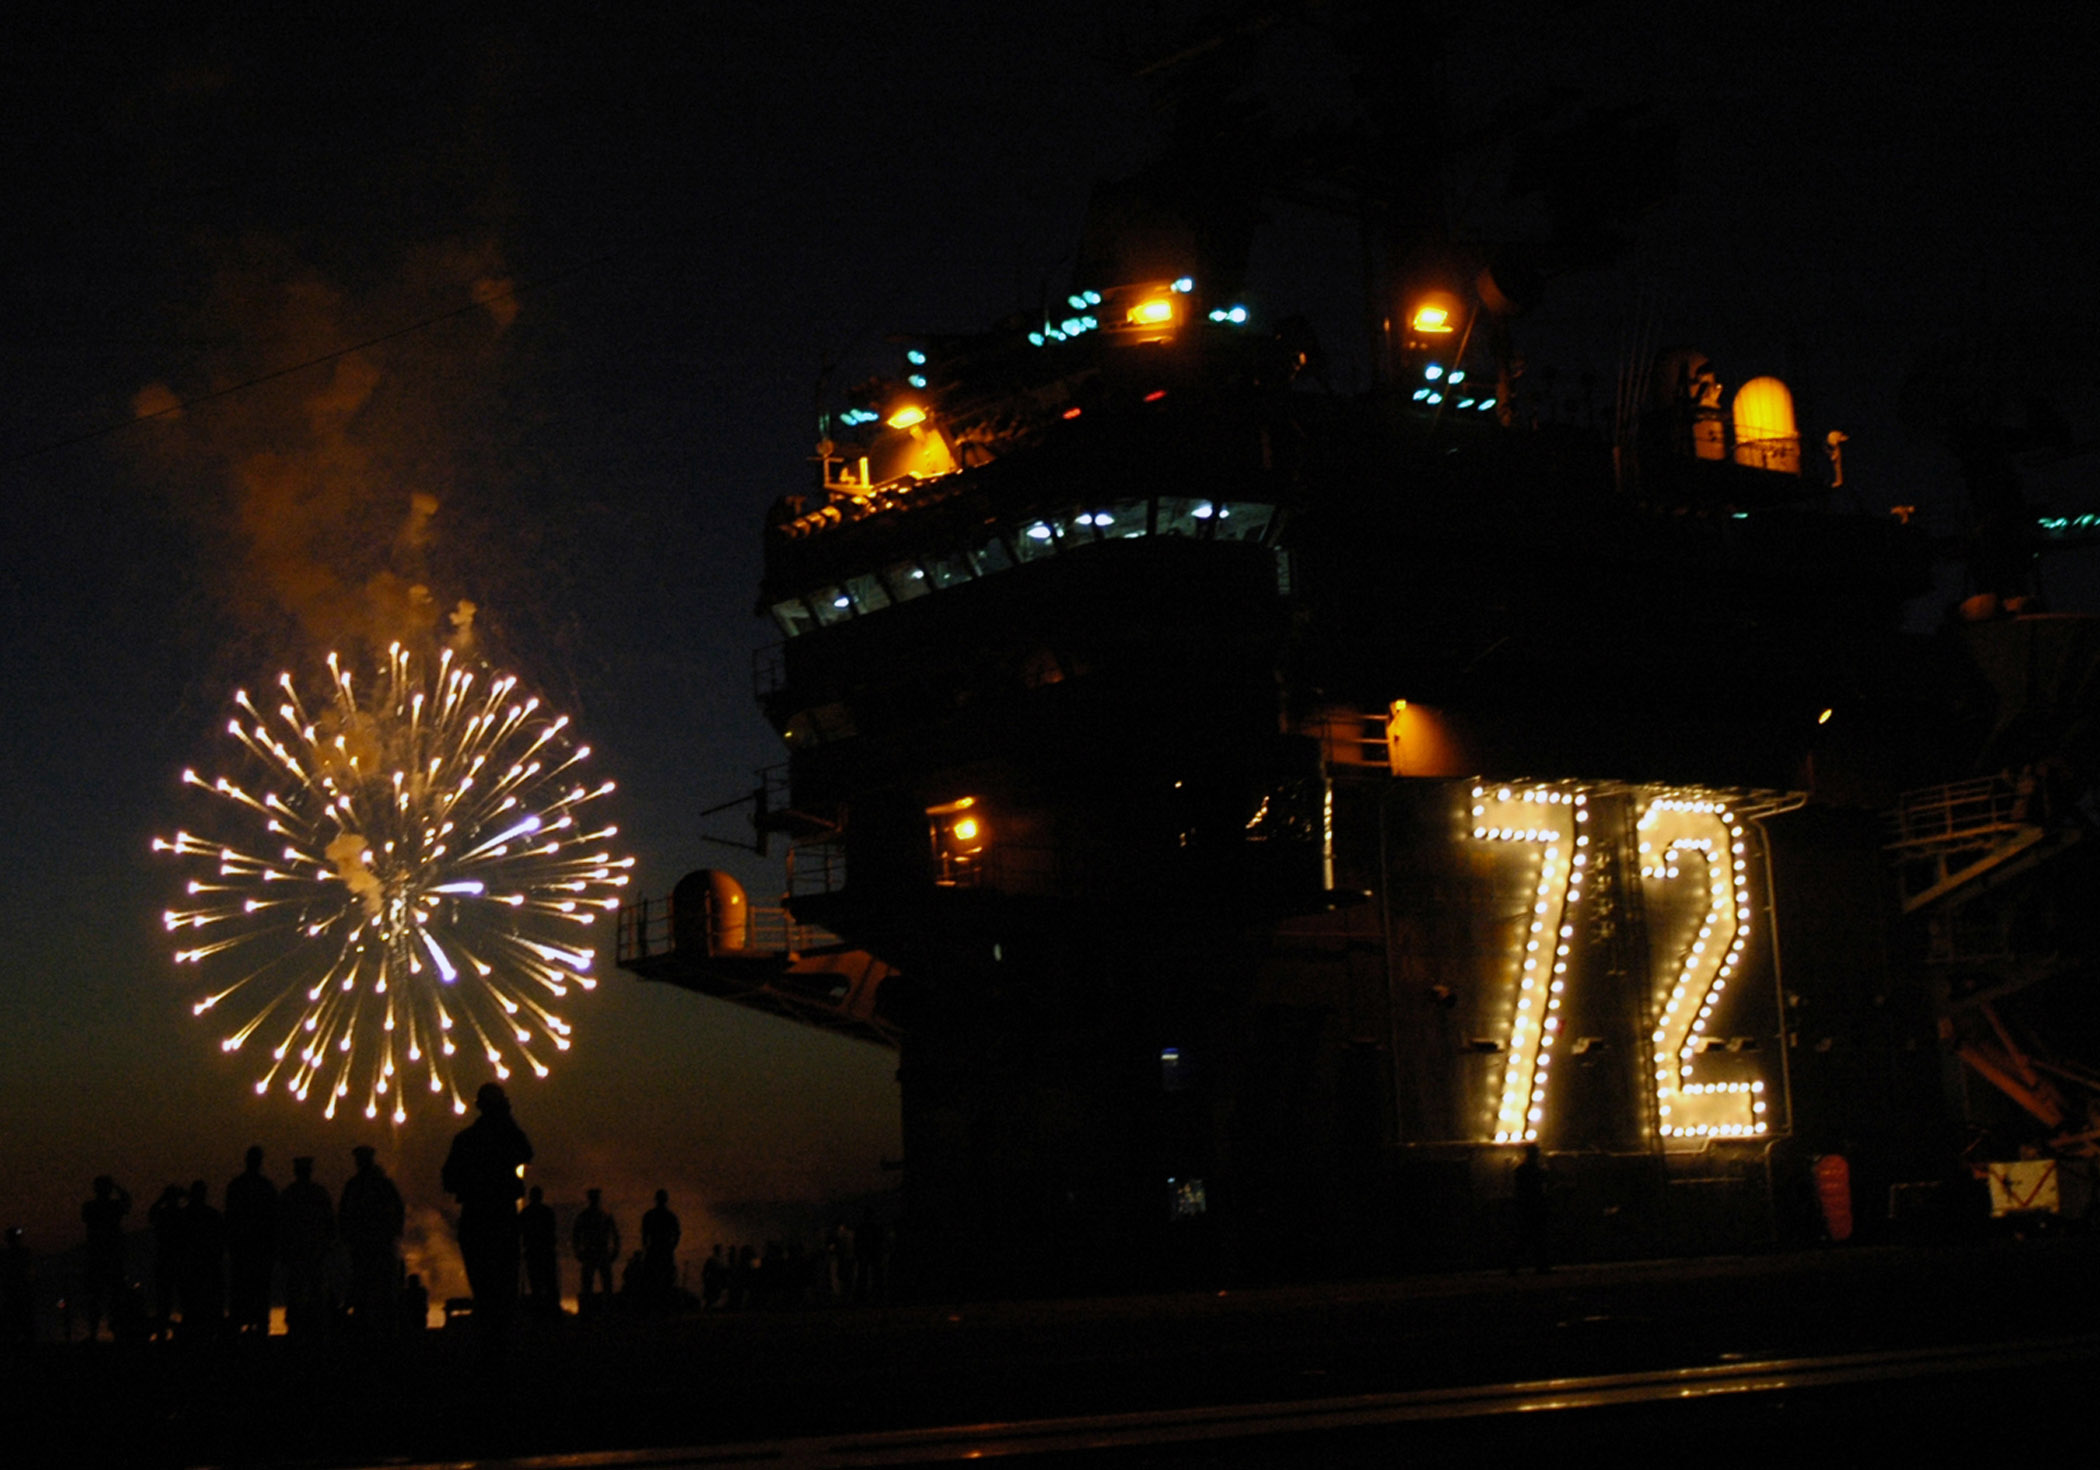 US_Navy_070704-N-5837R-016_Sailors%2C_friends_and_family_watch_Naval_Station_Everett%27s_Fourth_of_July_fireworks_display_from_the_flight_deck_of_Nimitz-Class_aircraft_carrier_USS_Abraham_Lincoln_%28CVN_72%29.jpg